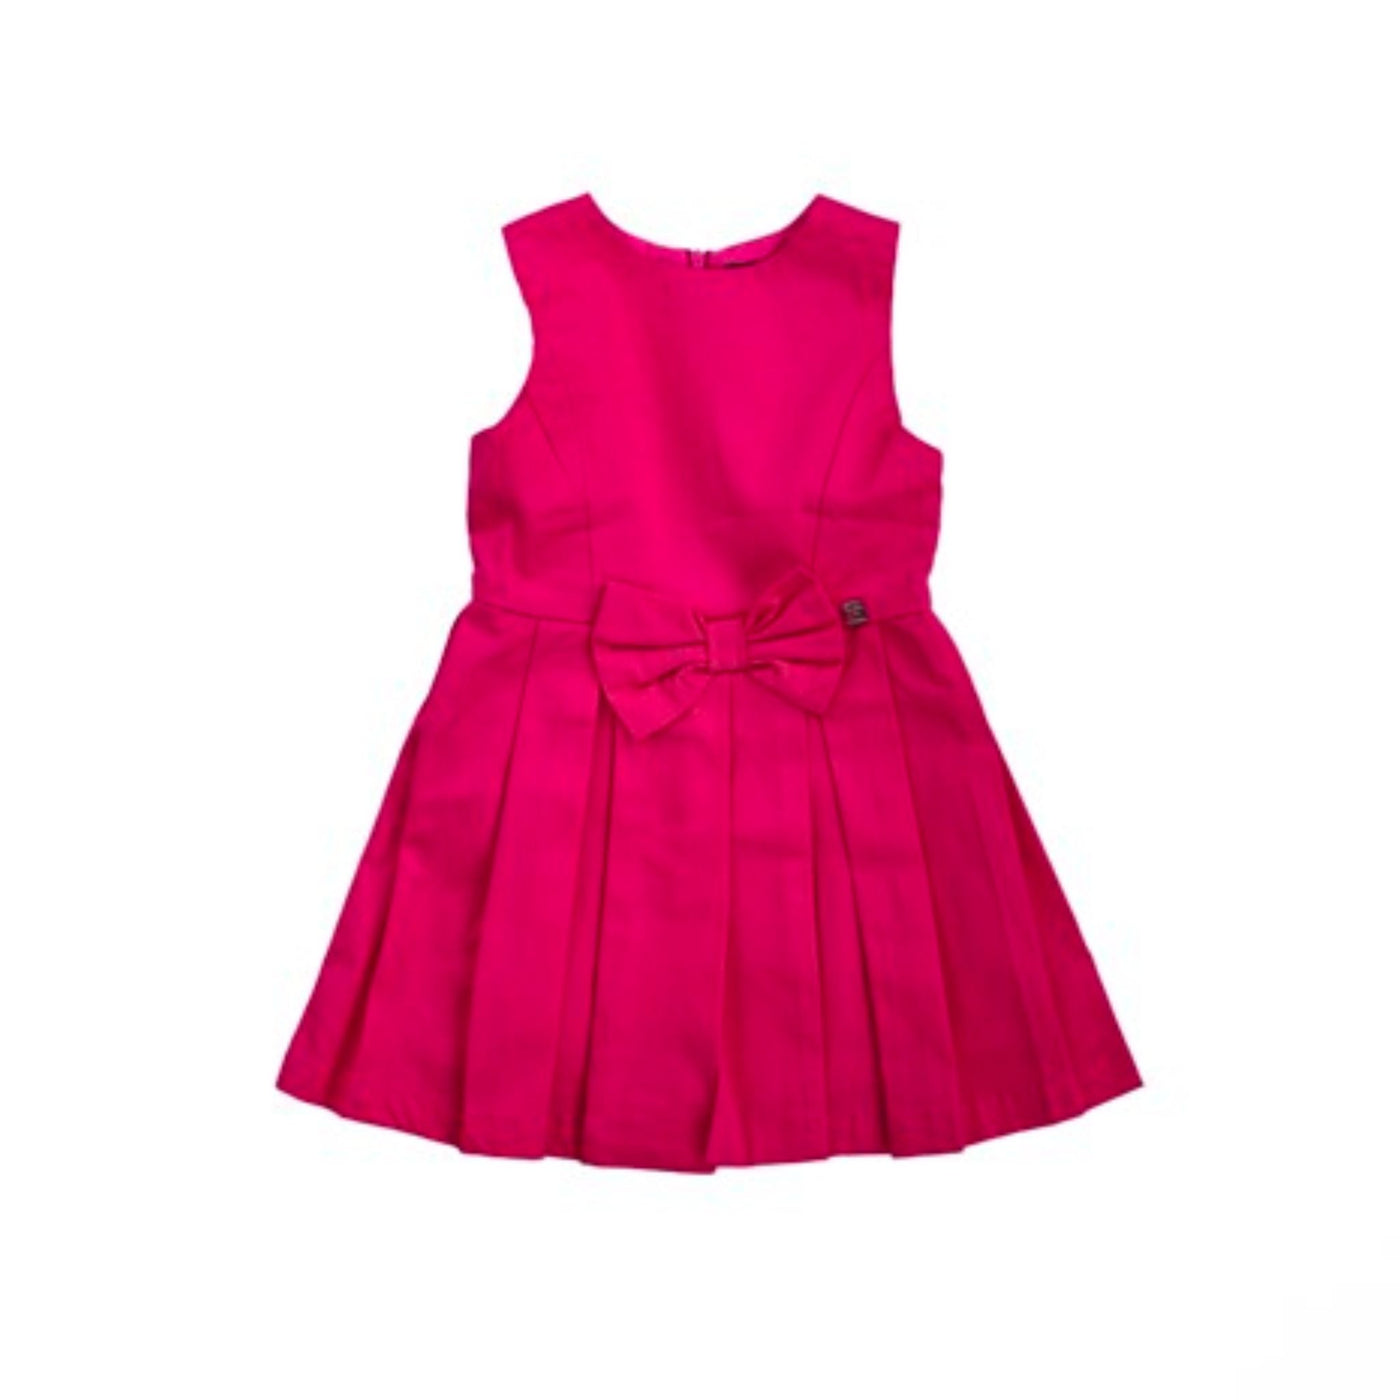 Girl dress 3-7 years with bow